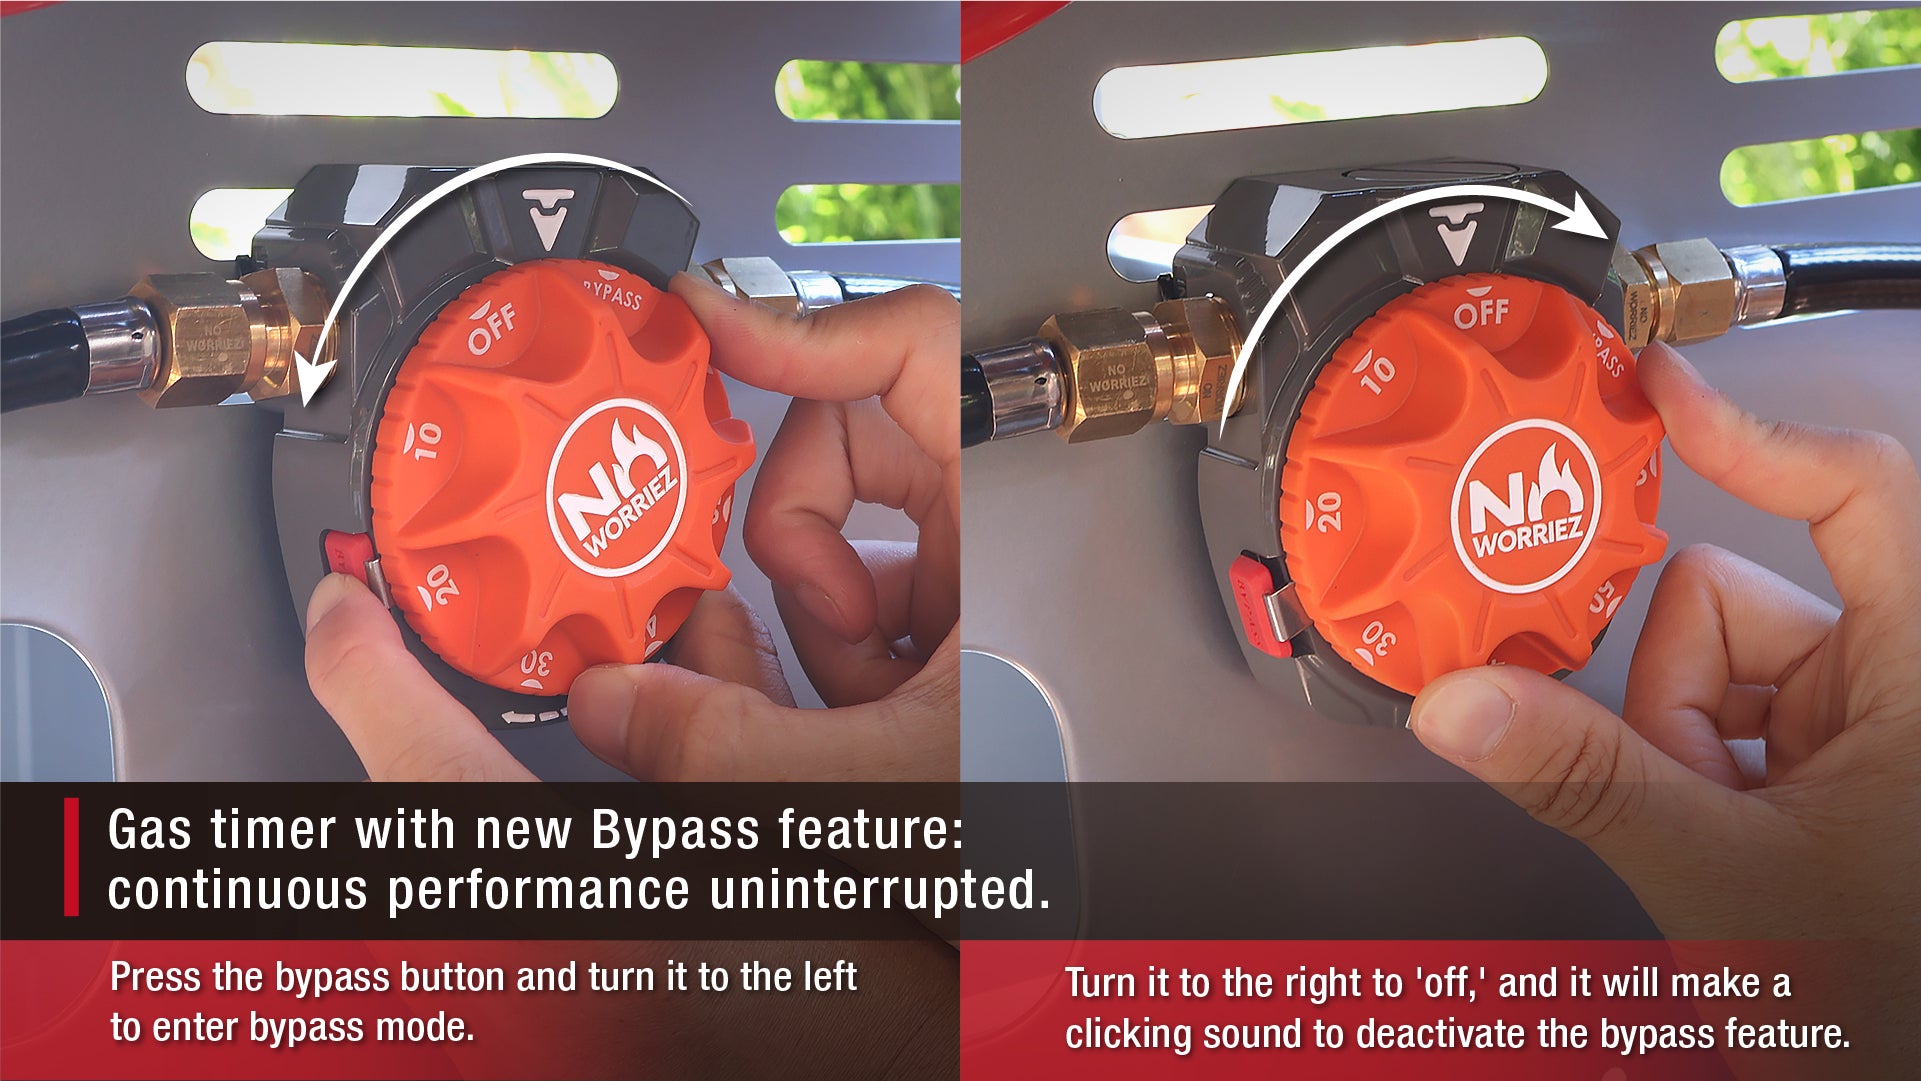 How to set the Bypass function of No Worriez Commando gas timer 